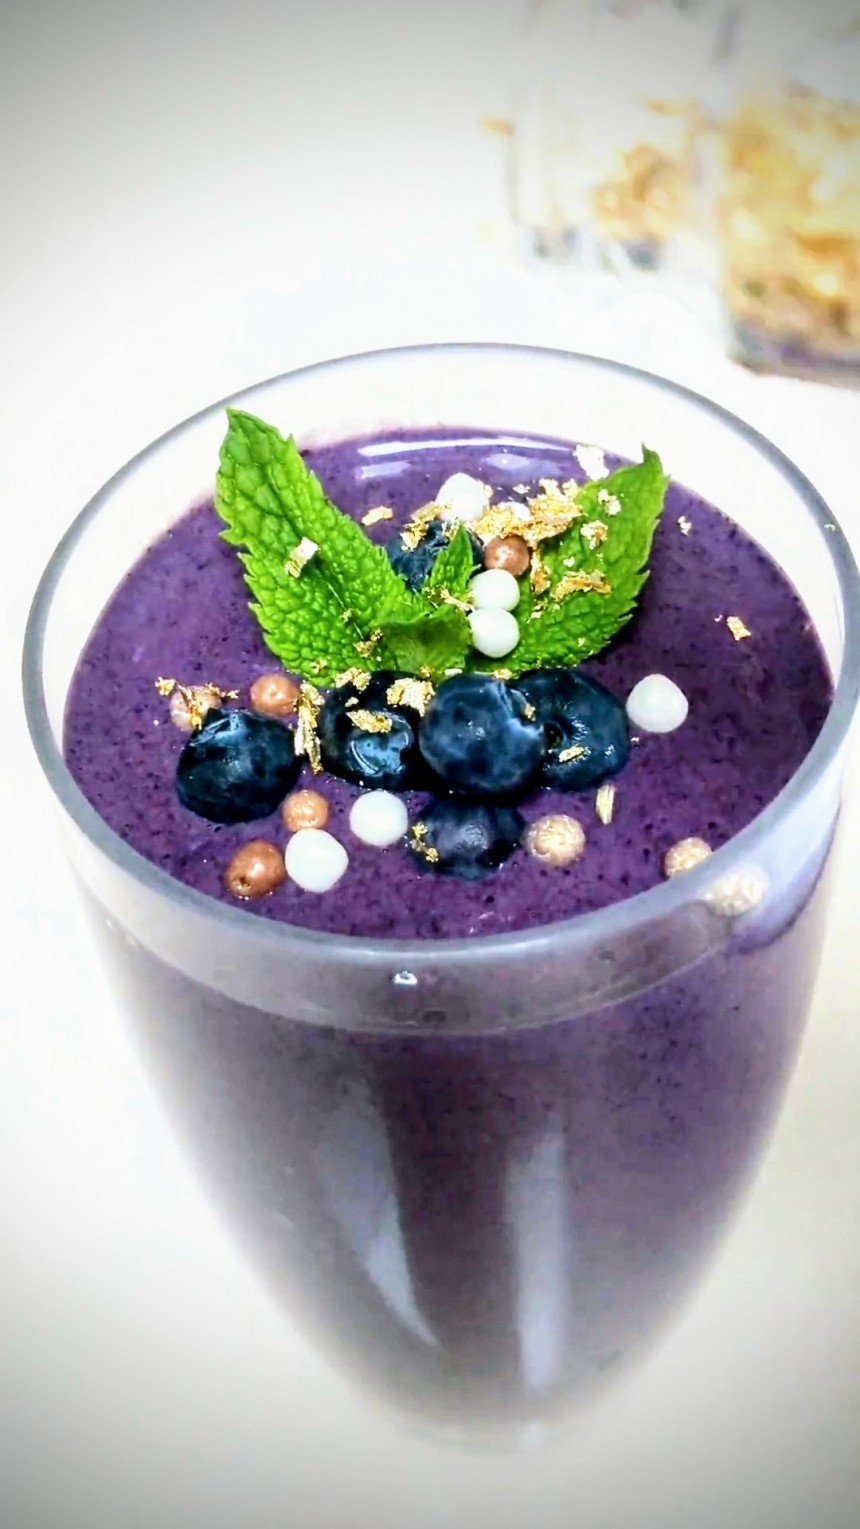 Low-Calorie Blueberry & Banana Smoothie